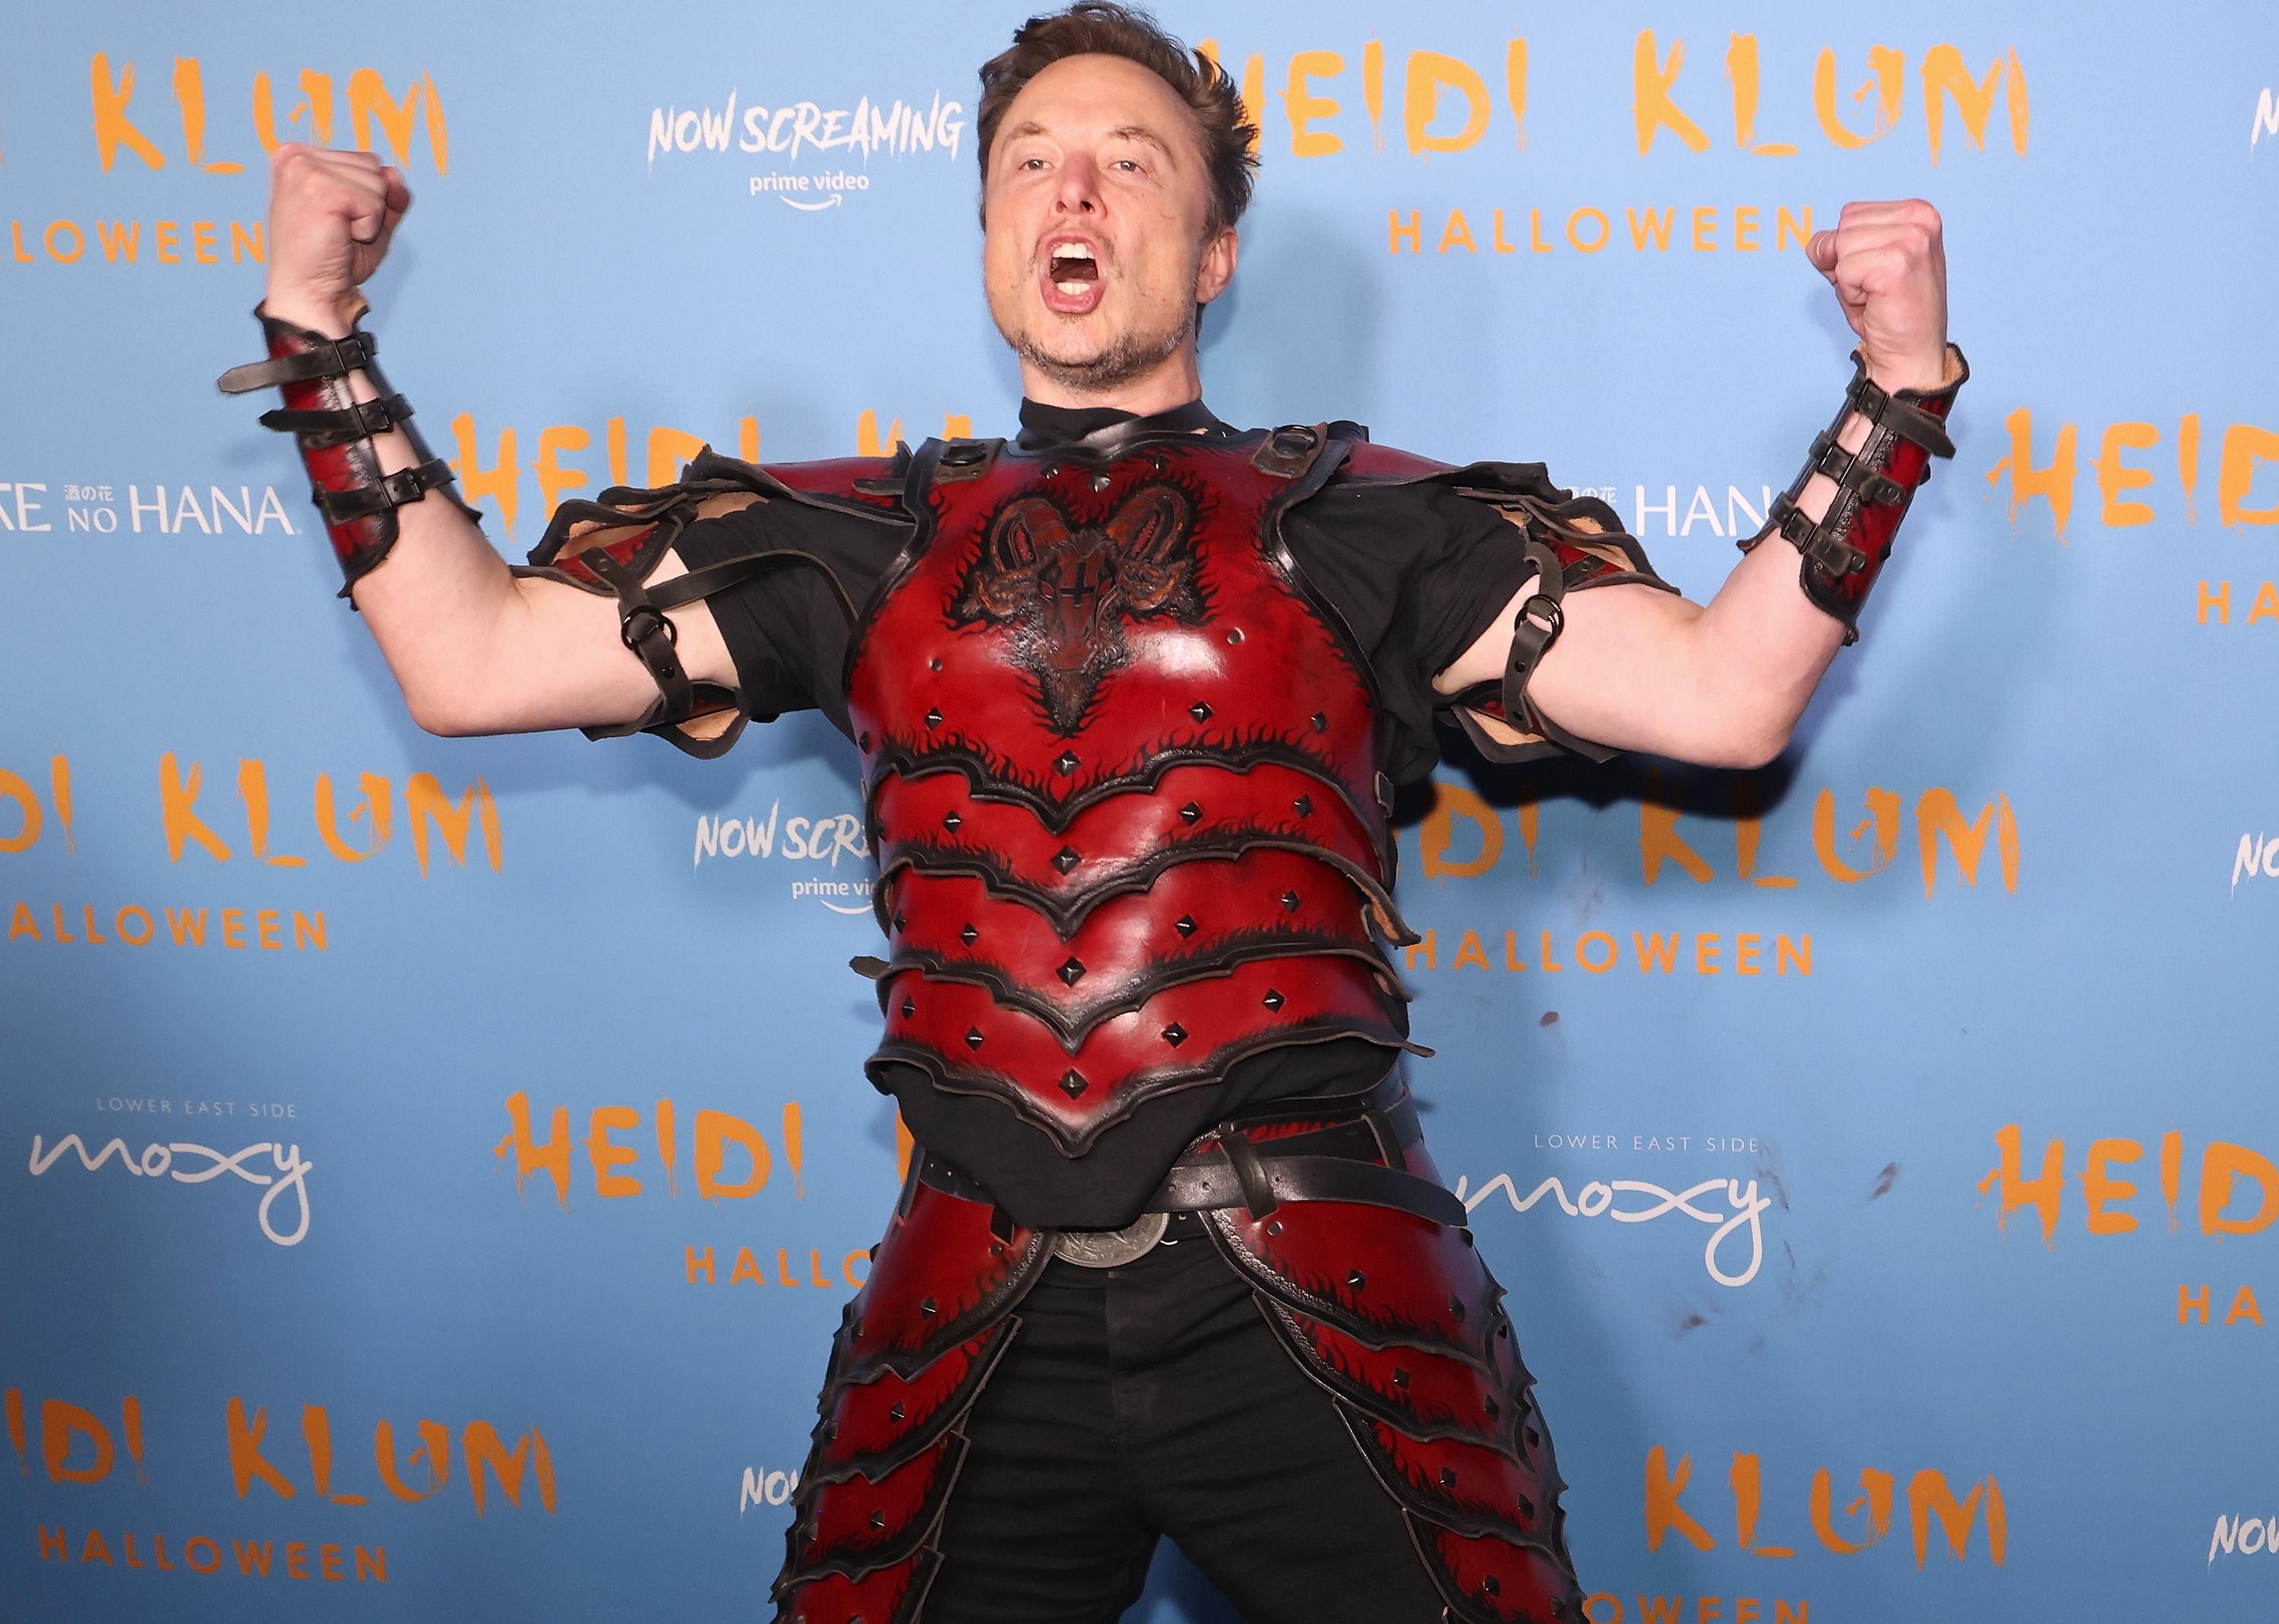 Elon Musk wearing armour as a Halloween costume and fleing his muscles.